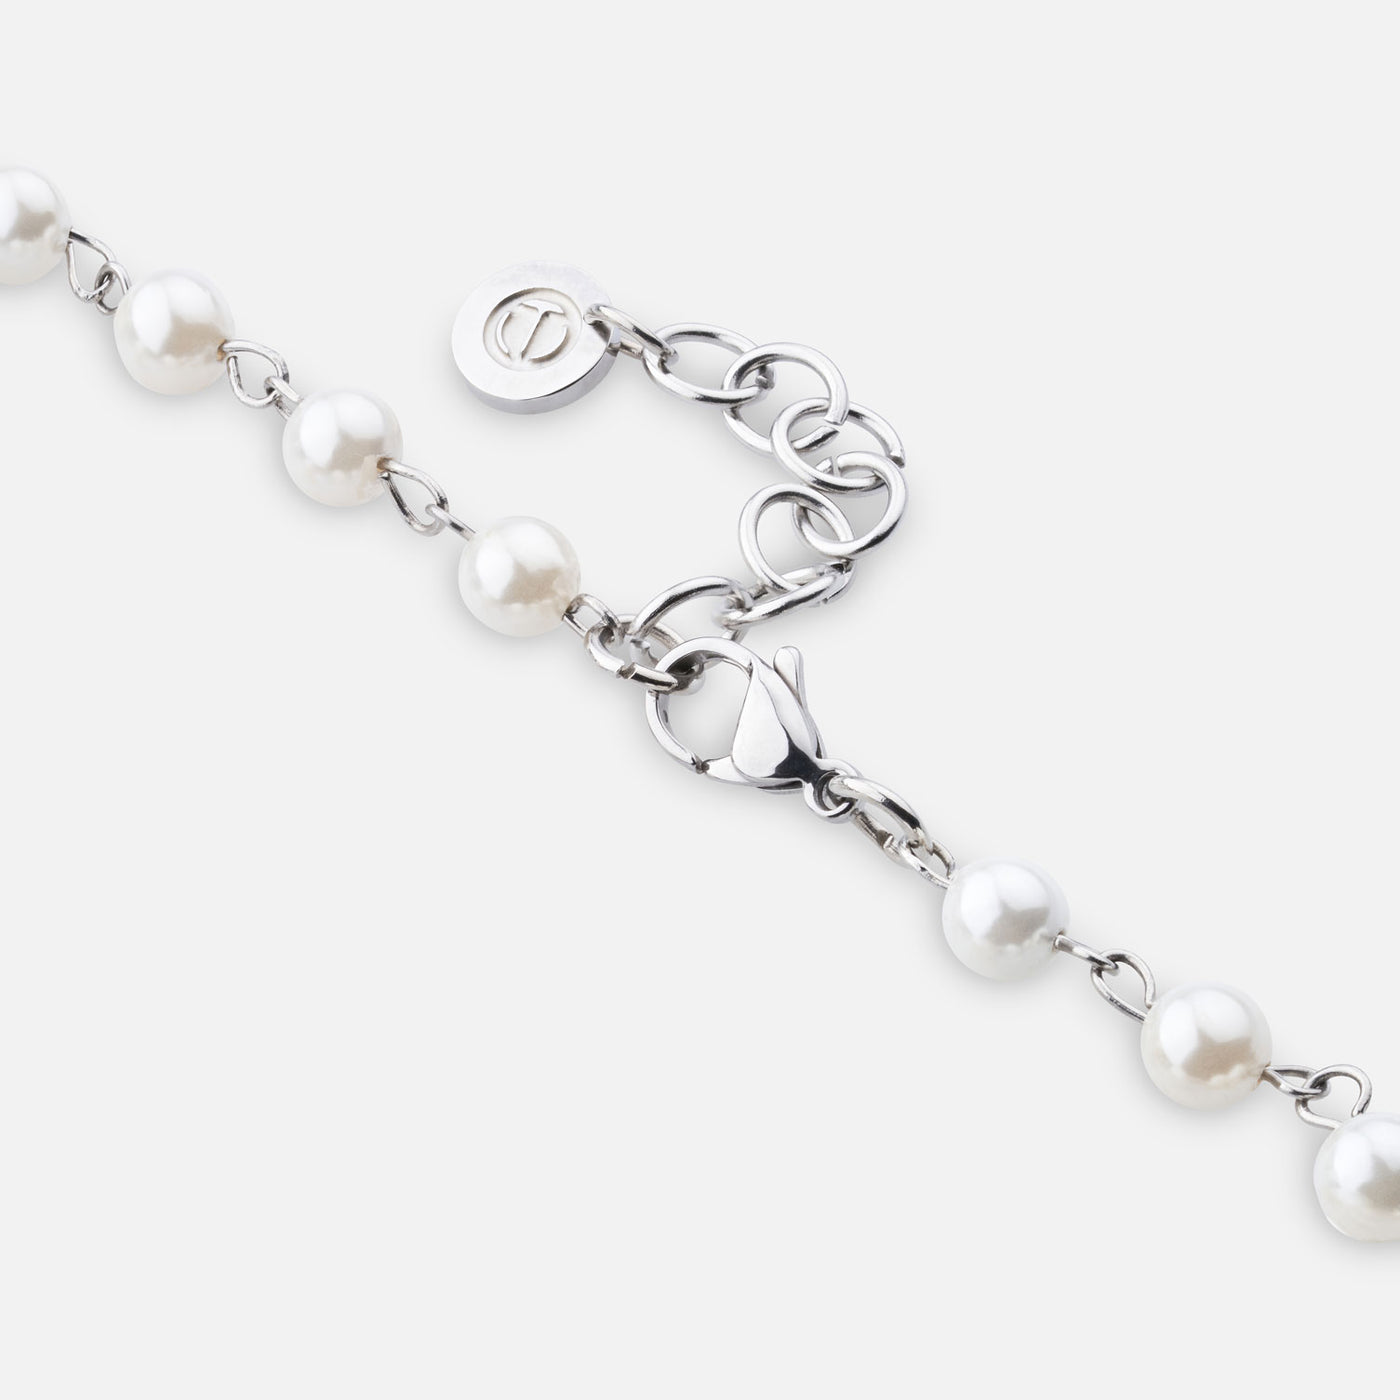 Chained Pearls Bracelet - Contrasting